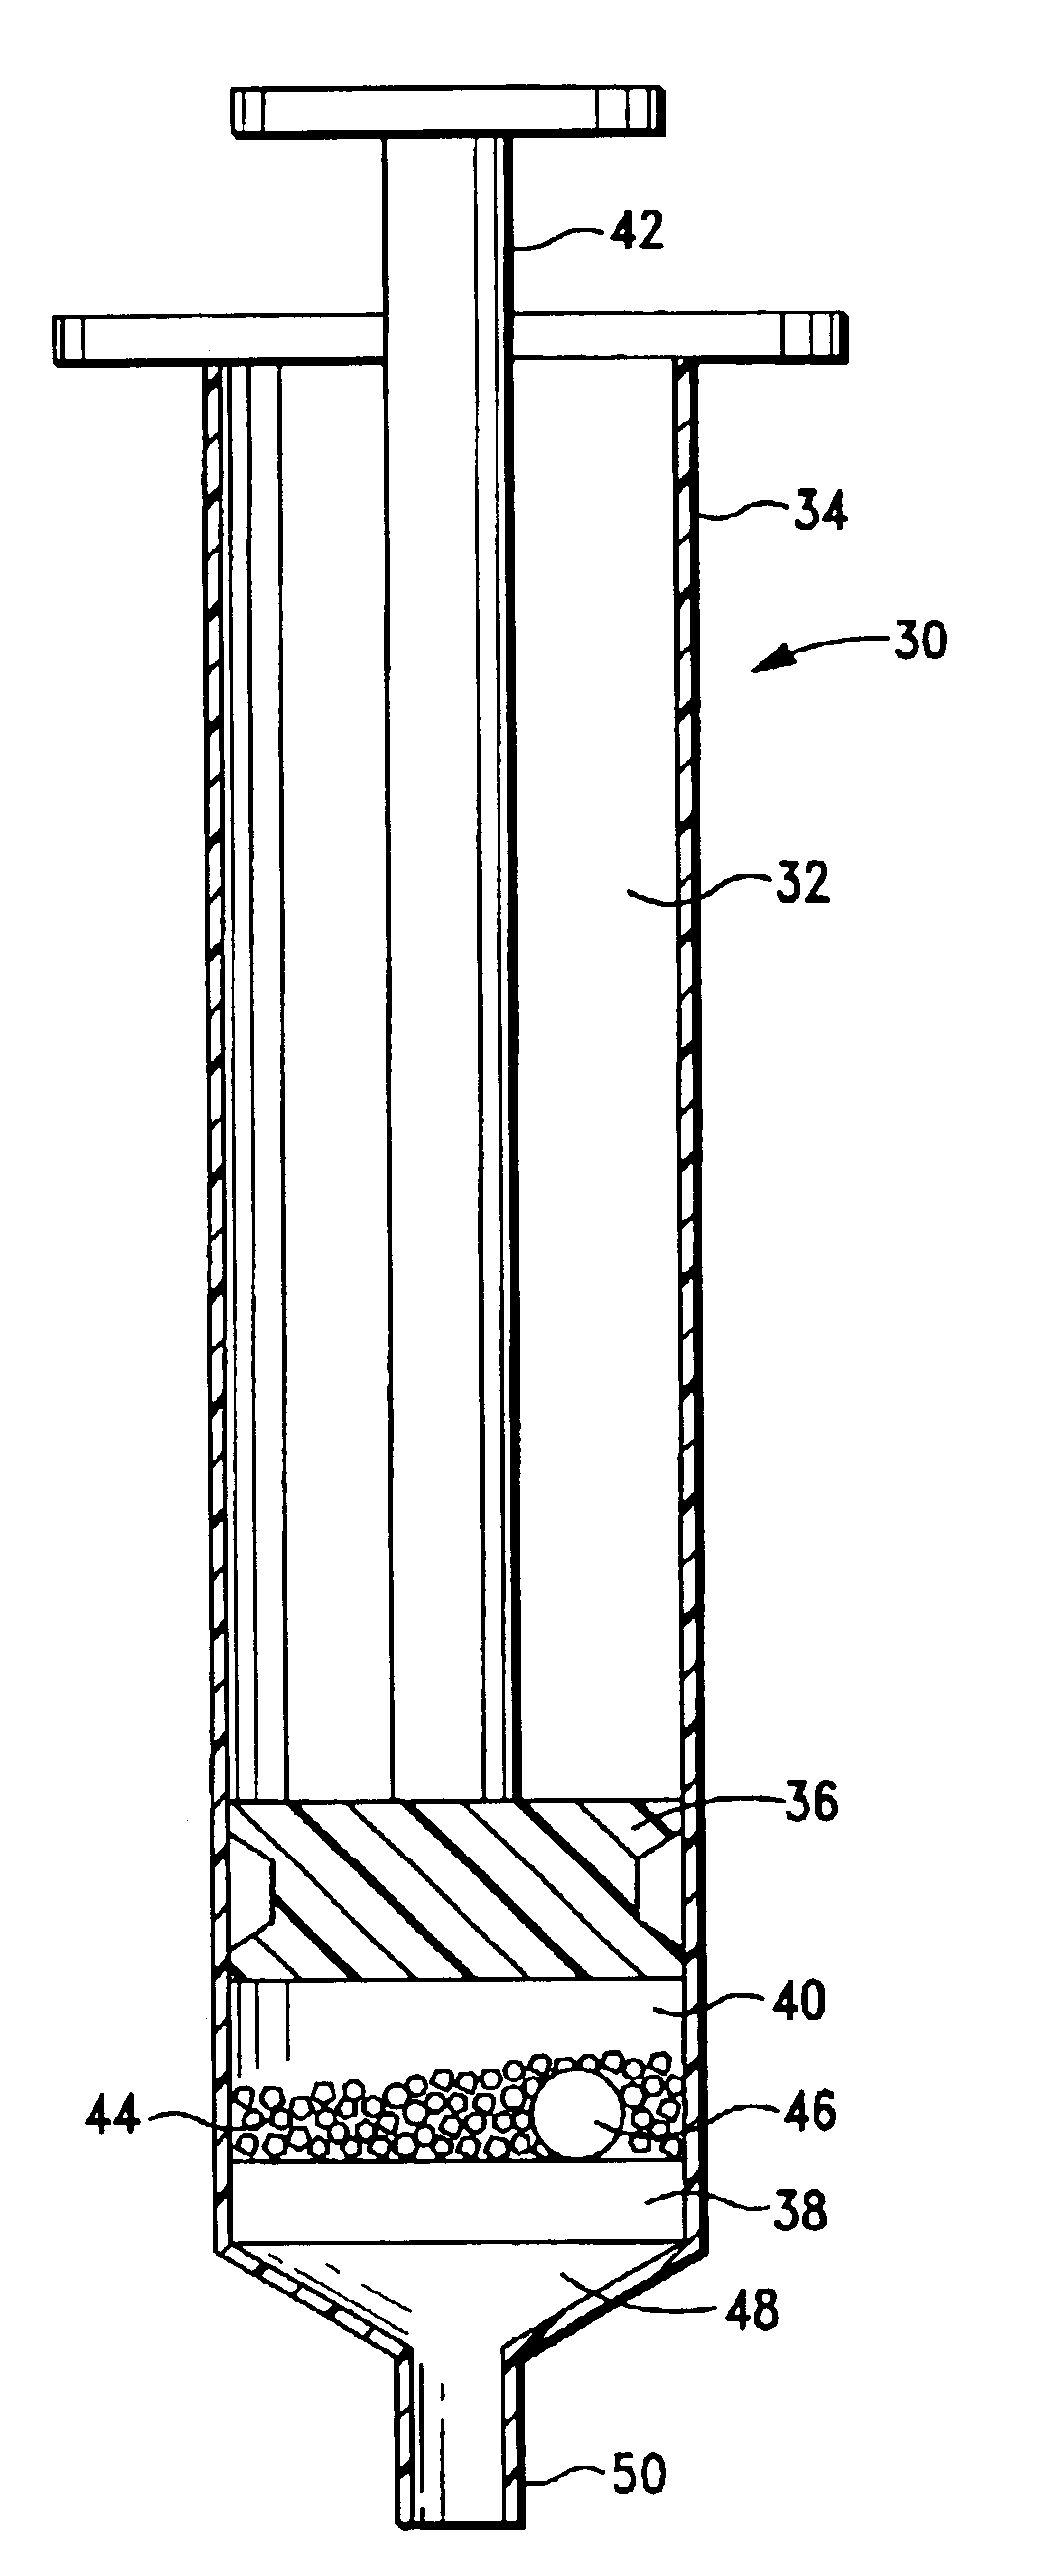 Plasma concentrate apparatus and method